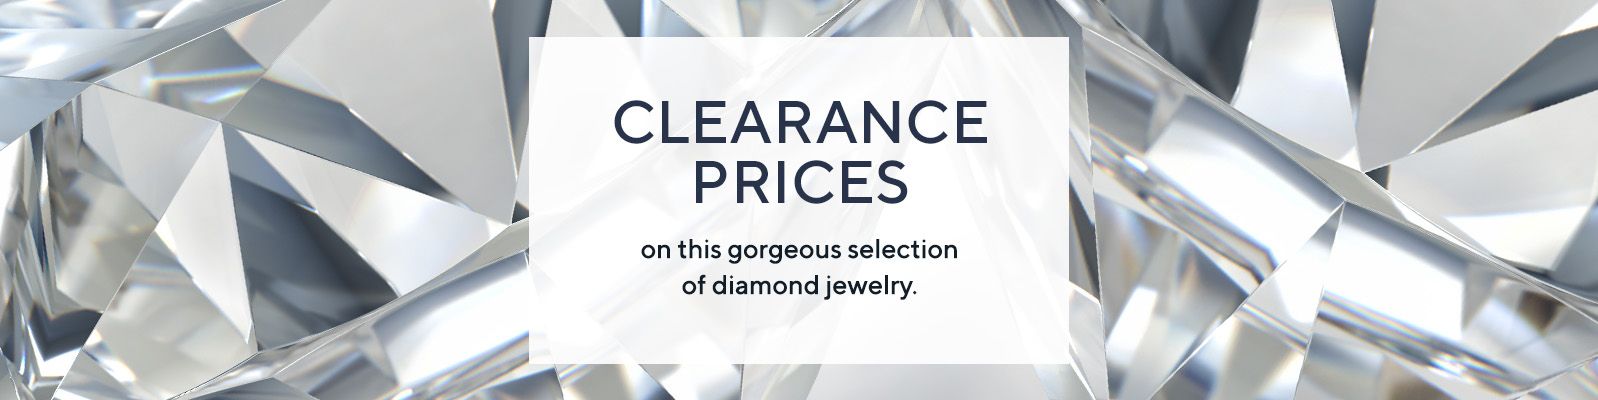 Clearance Prices on this gorgeous selection of diamond jewelry.